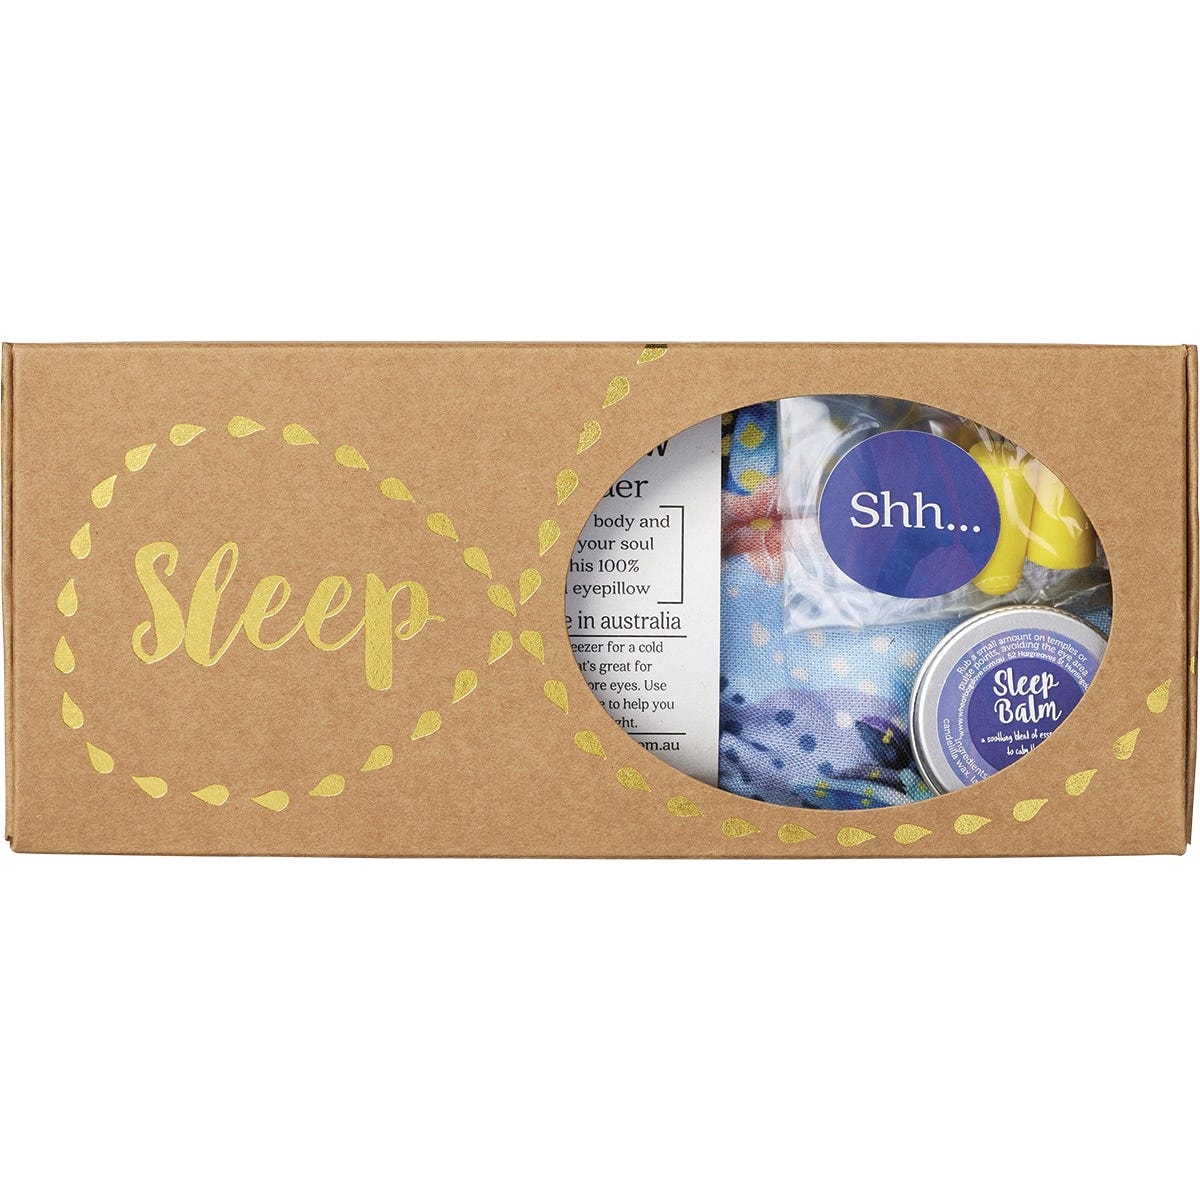 Wheatbags Love Sleep Gift Pack Blue Cockatoo Lavender Scented